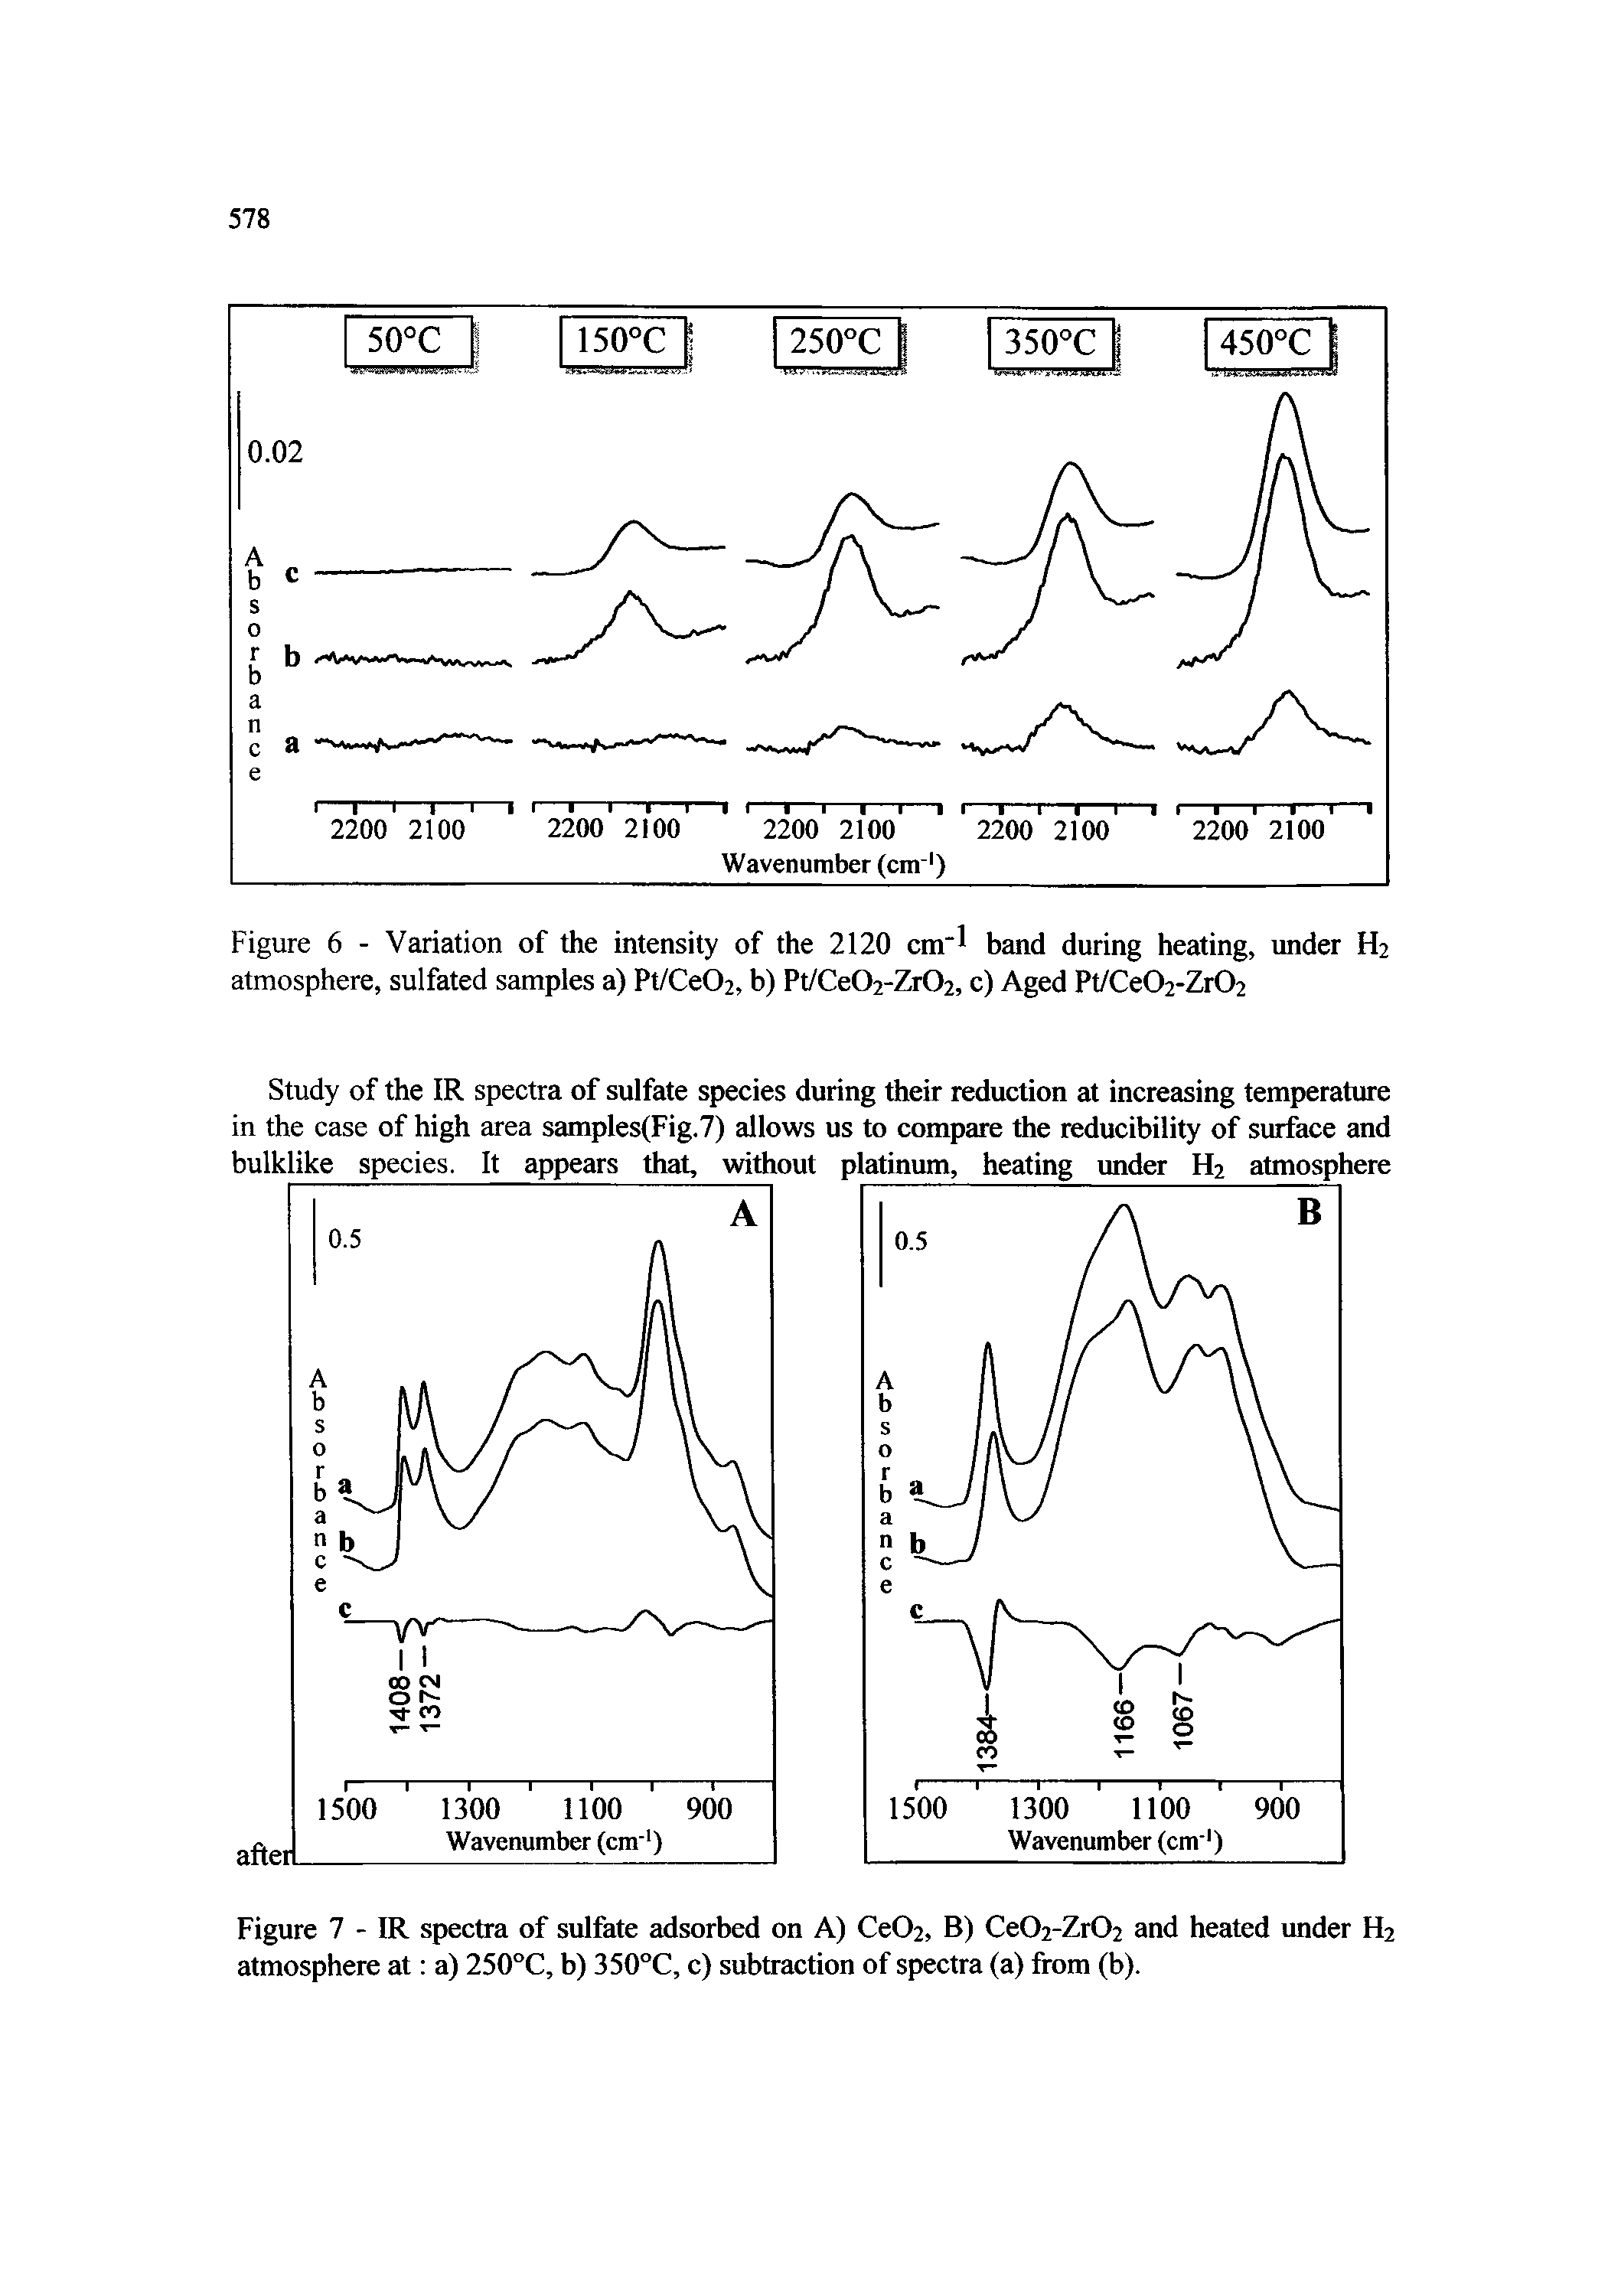 Figure 7 - IR spectra of sulfate adsorbed on A) Ce02, B) Ce02-Zr02 and heated under H2 atmosphere at a) 250°C, b) 350°C, c) subtraction of spectra (a) from (b).